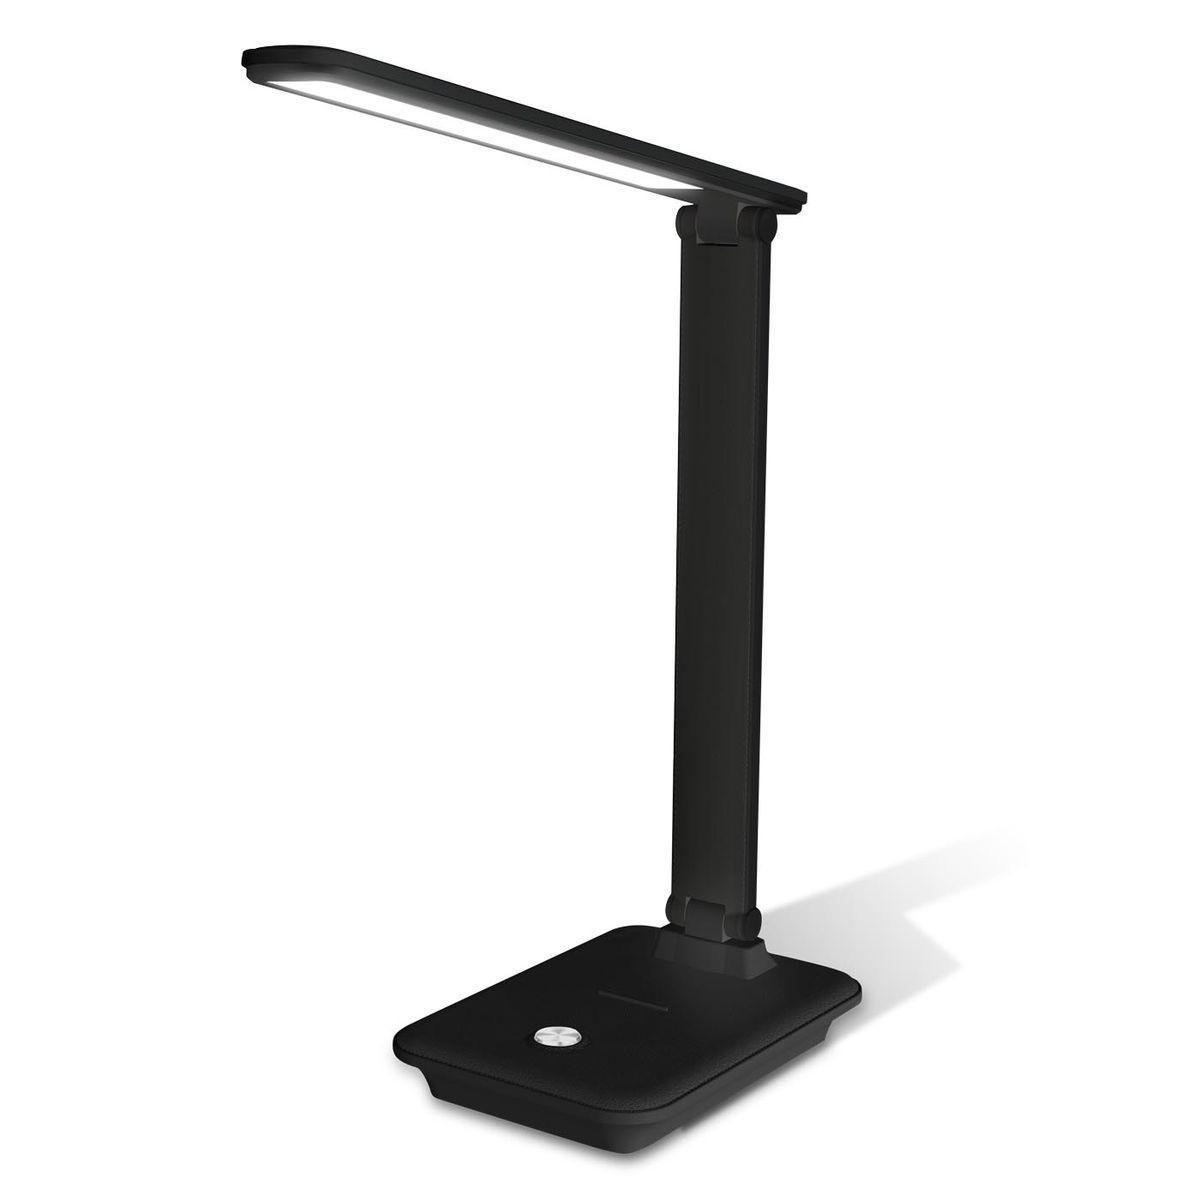 Настольная лампа Ambrella light Desk DE503 simple and modern combination of desk and chair for staff office four person desk worker workstation office light luxury